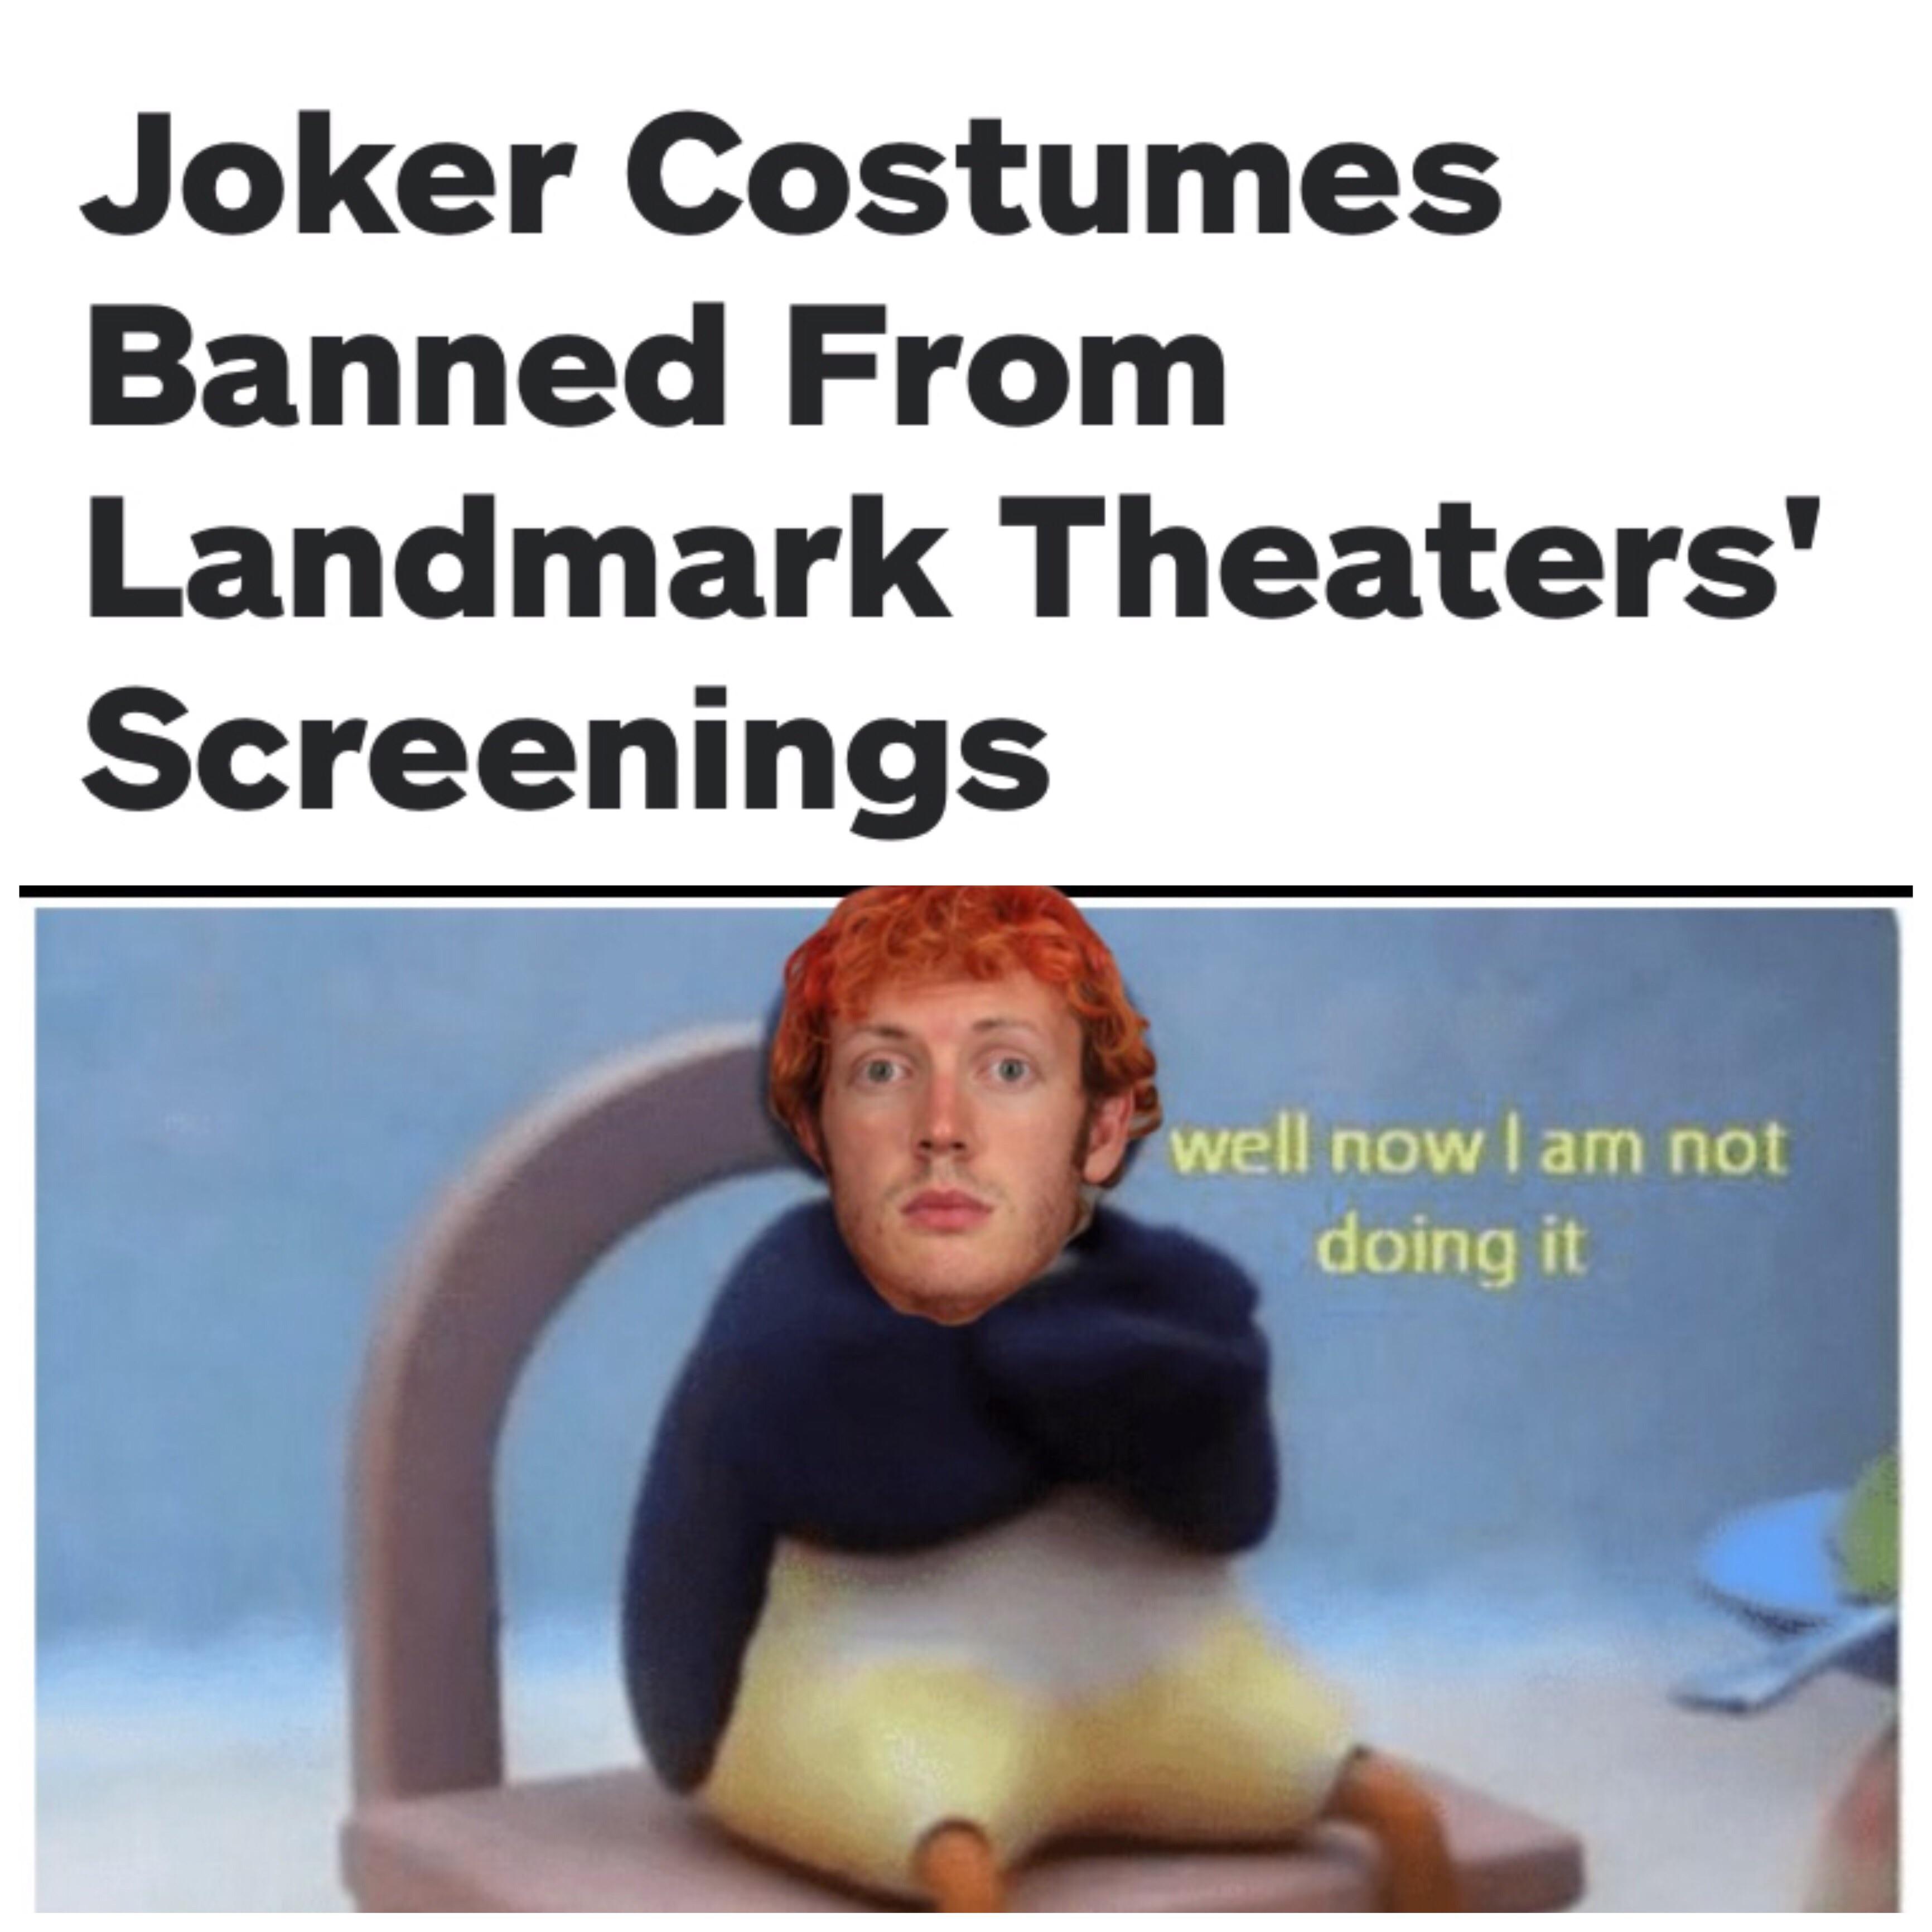 dark offensive memes - Joker Costumes Banned From Landmark Theaters' Screenings well now am not doing it